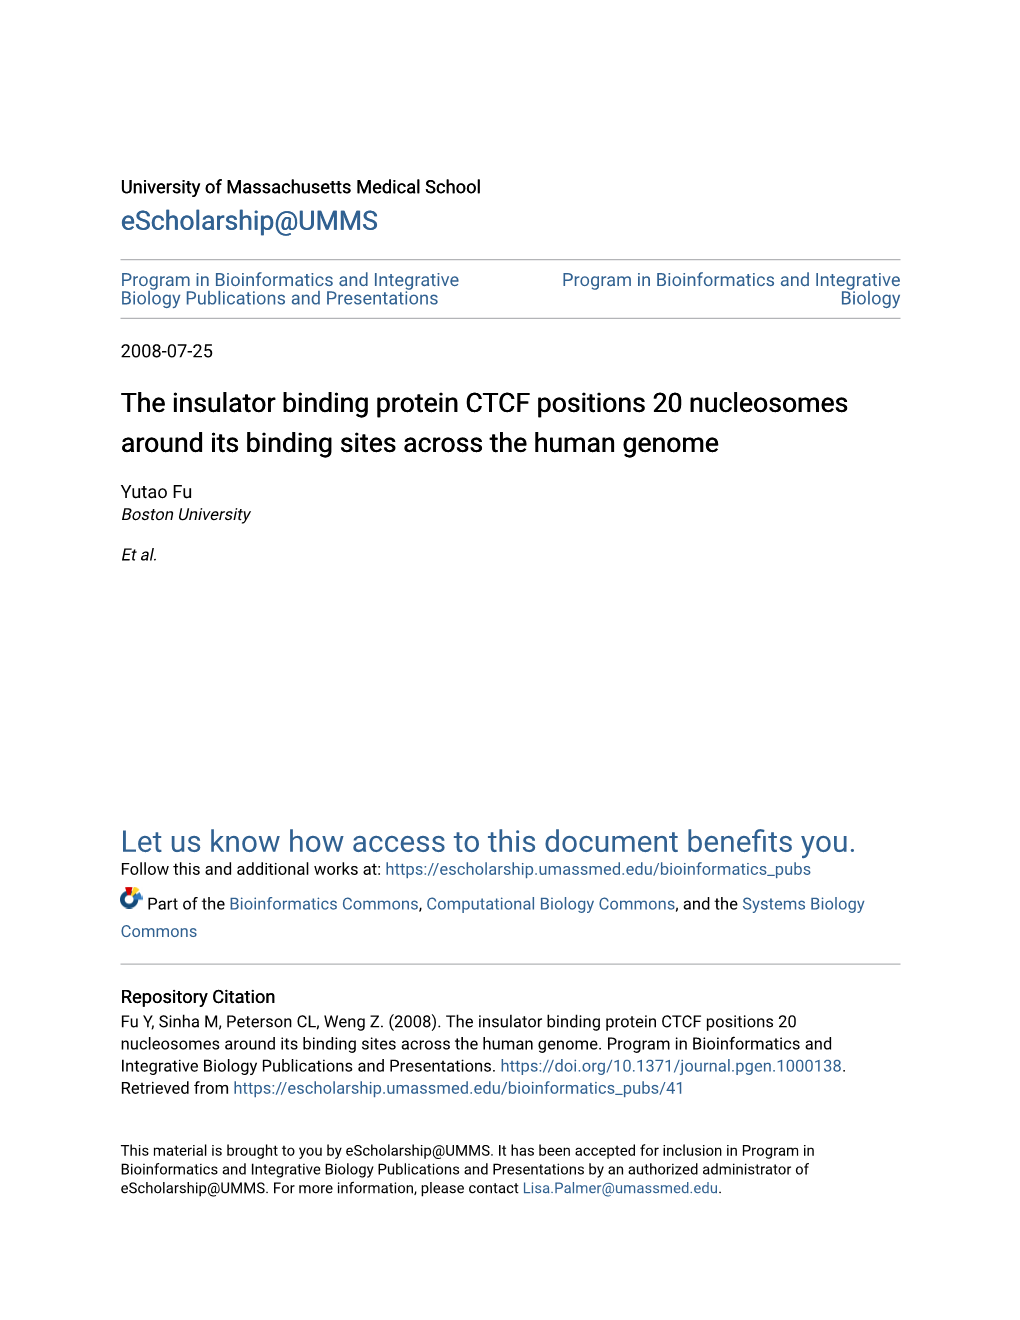 The Insulator Binding Protein CTCF Positions 20 Nucleosomes Around Its Binding Sites Across the Human Genome